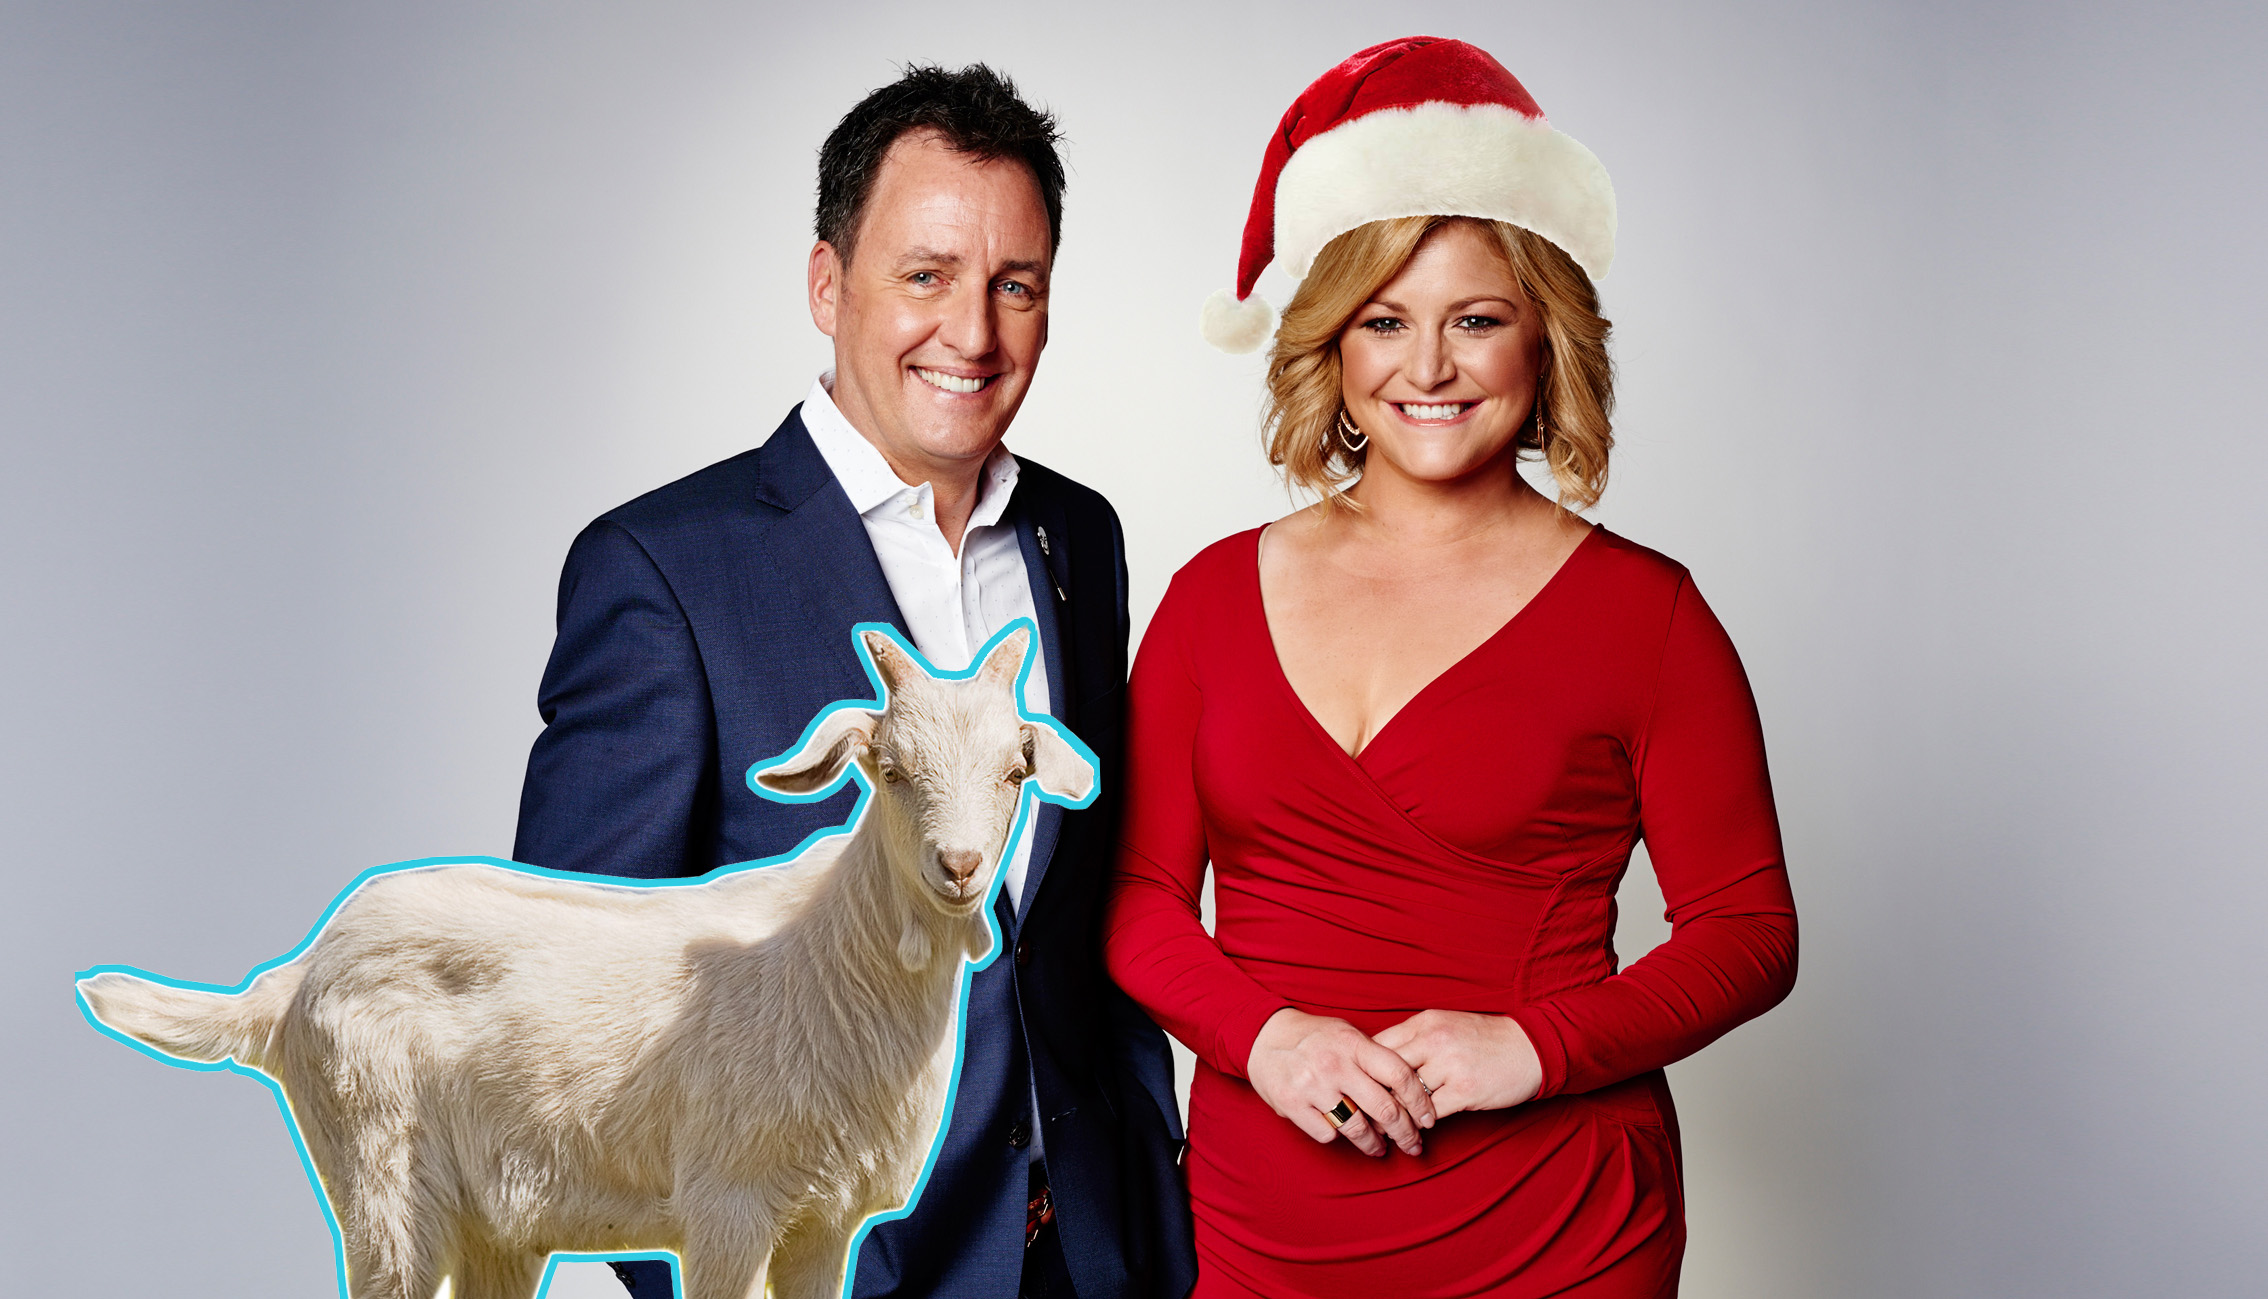 Toni Street gives Mike Hosking a goat for Christmas